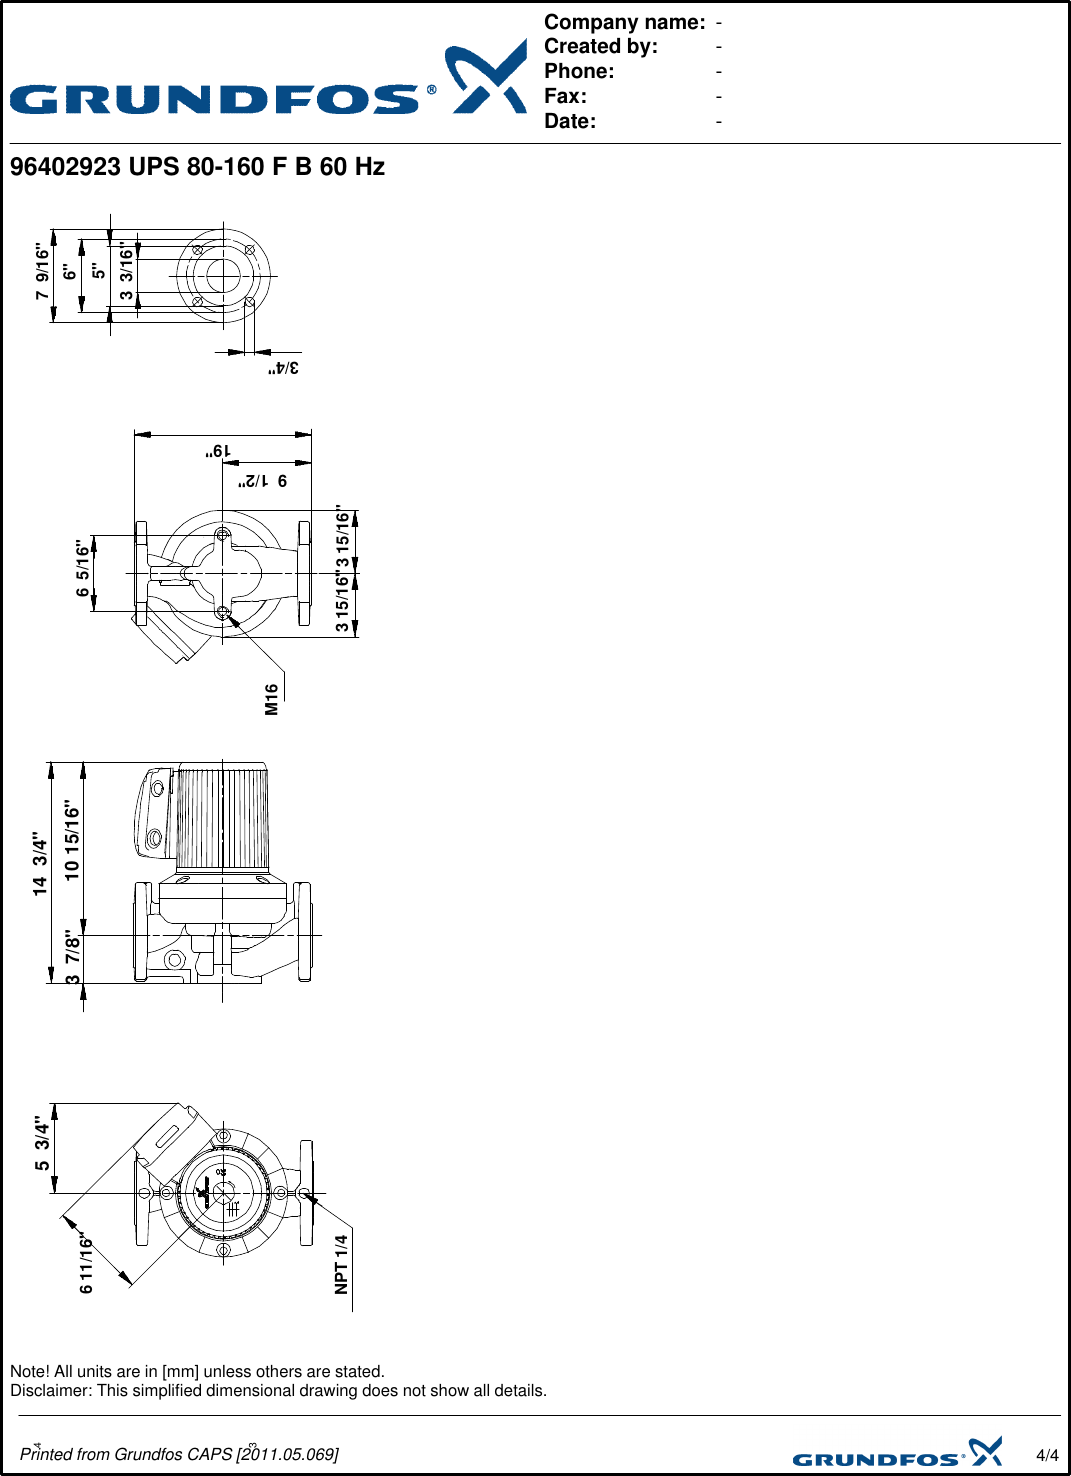 Page 4 of 4 - 535201 1 Grundfos Ups 80-160 Submittal Print/Preview User Manual